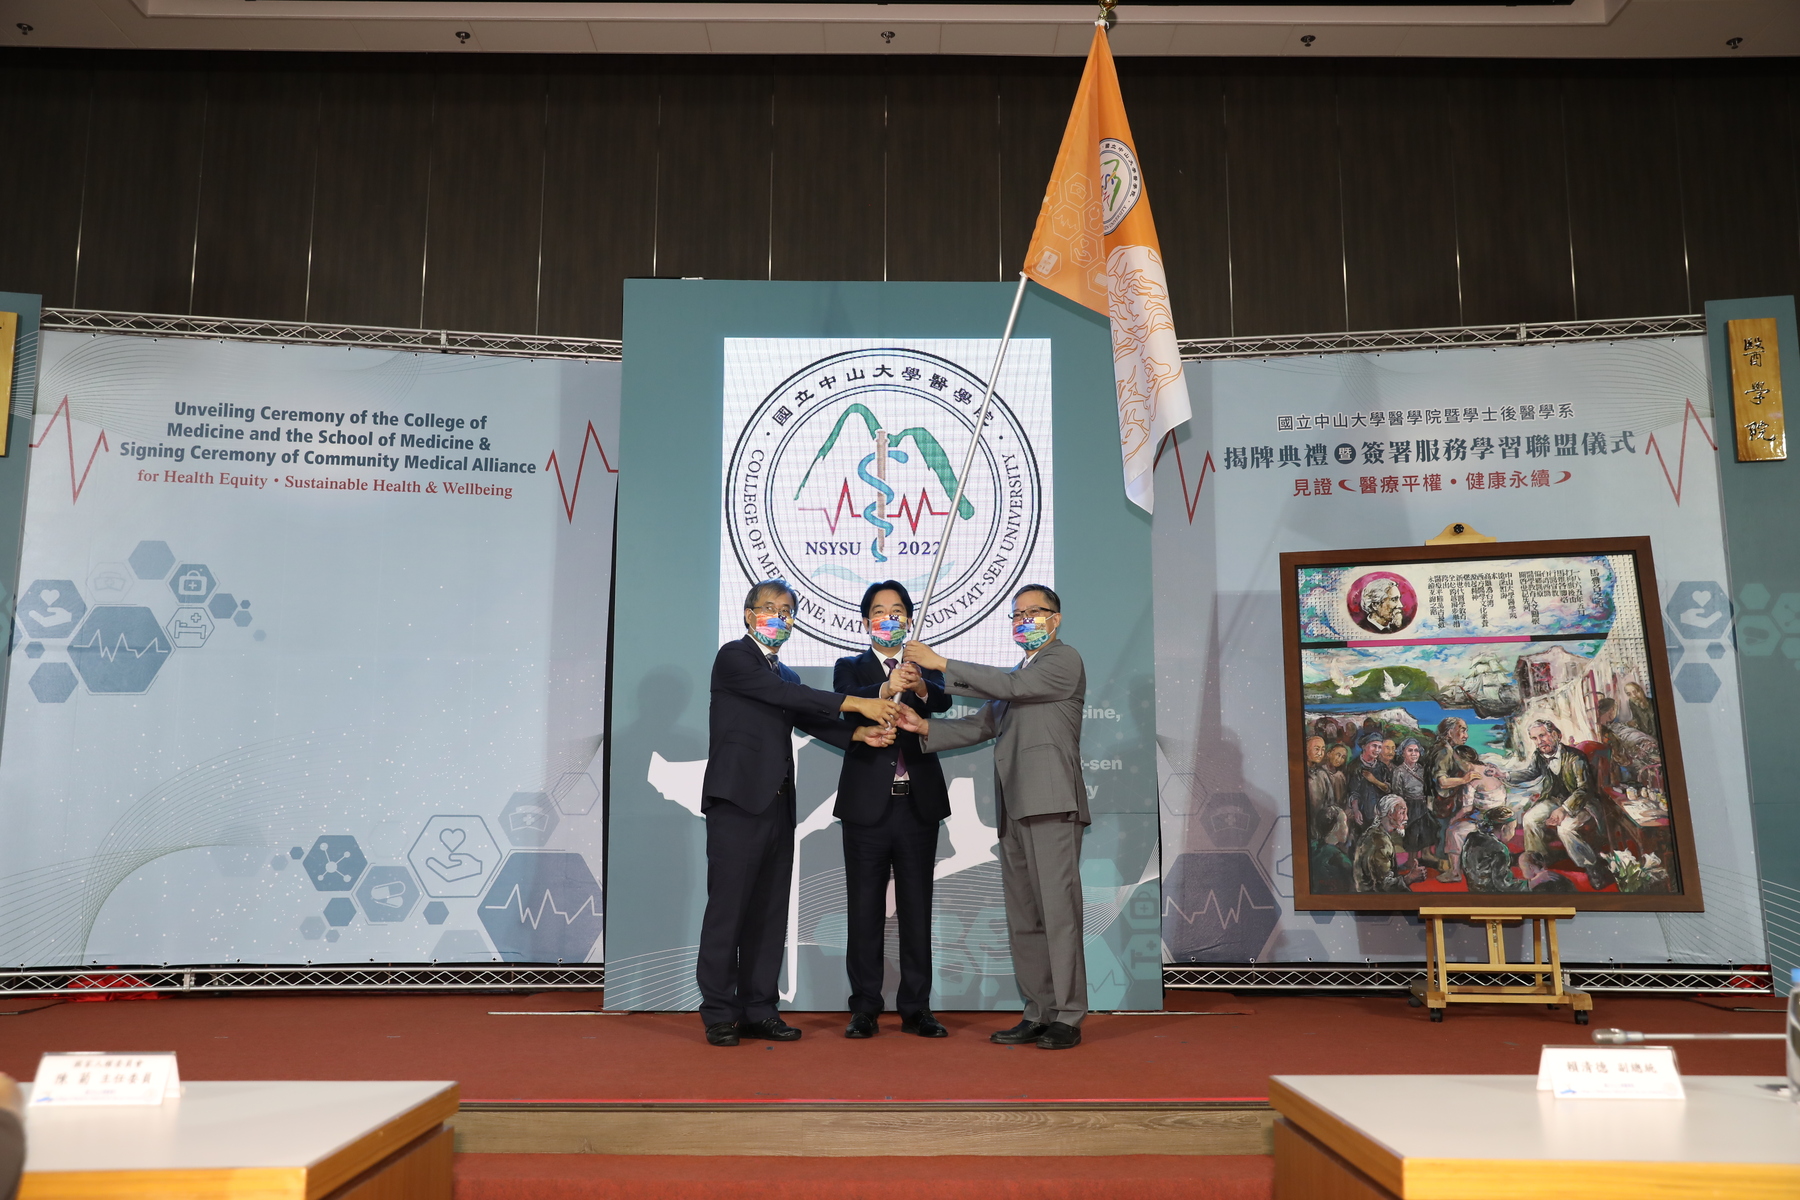 Flag Presentation Ceremony. From the left to the right are: NSYSU President Ying-Yao Cheng, Taiwan Vice President Lai Ching-te and the dean of the NSYSU College of Medicine Ming-Lung Yu.